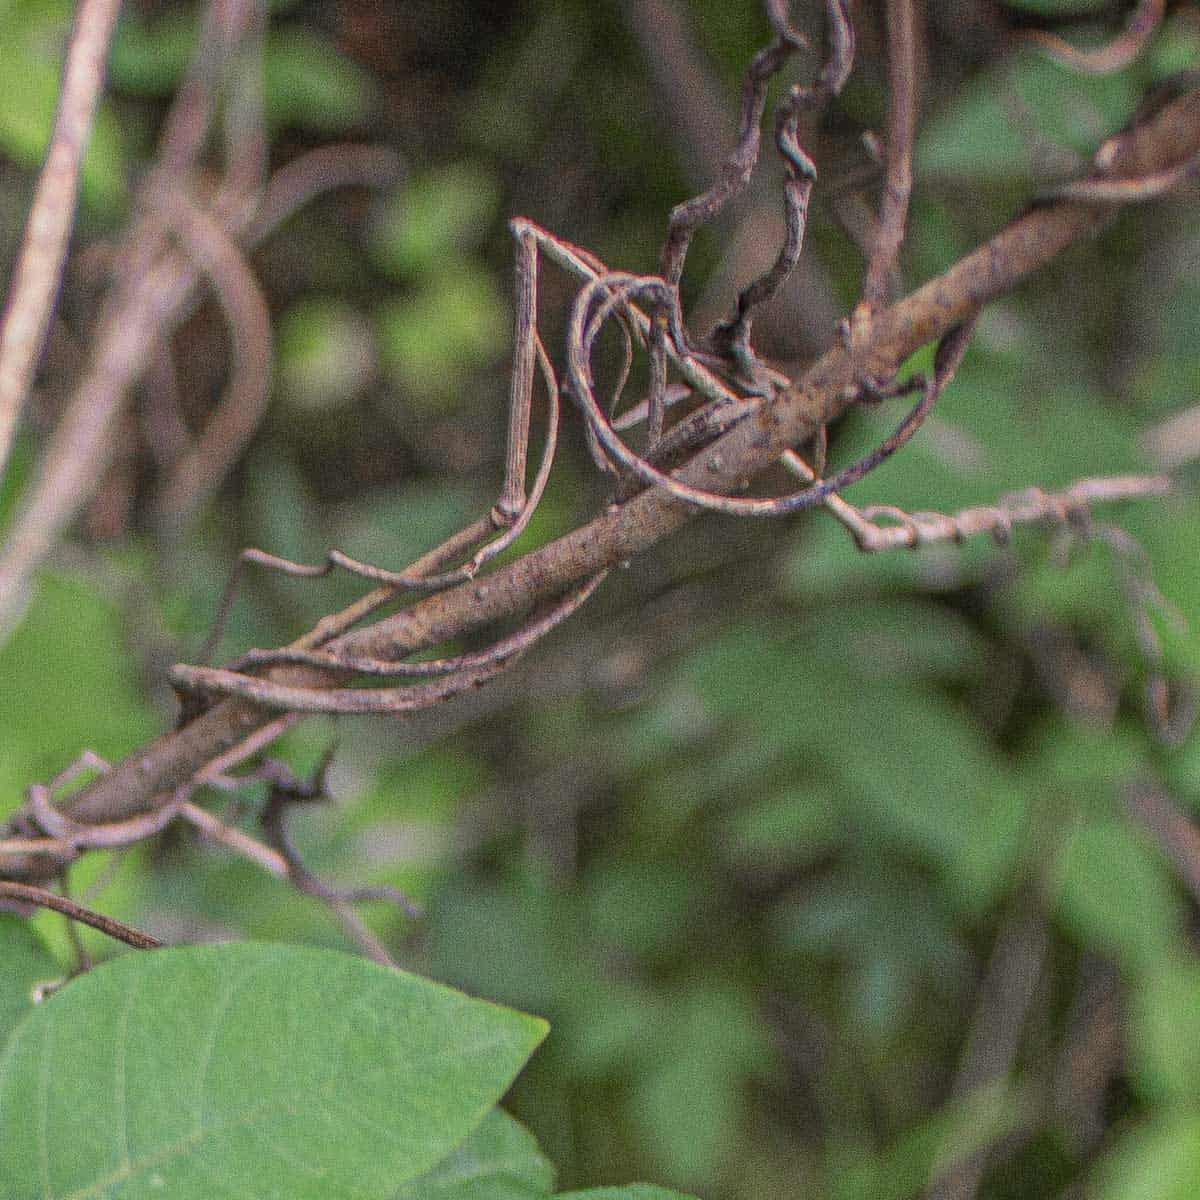 a close up image of a vine curling around a branch